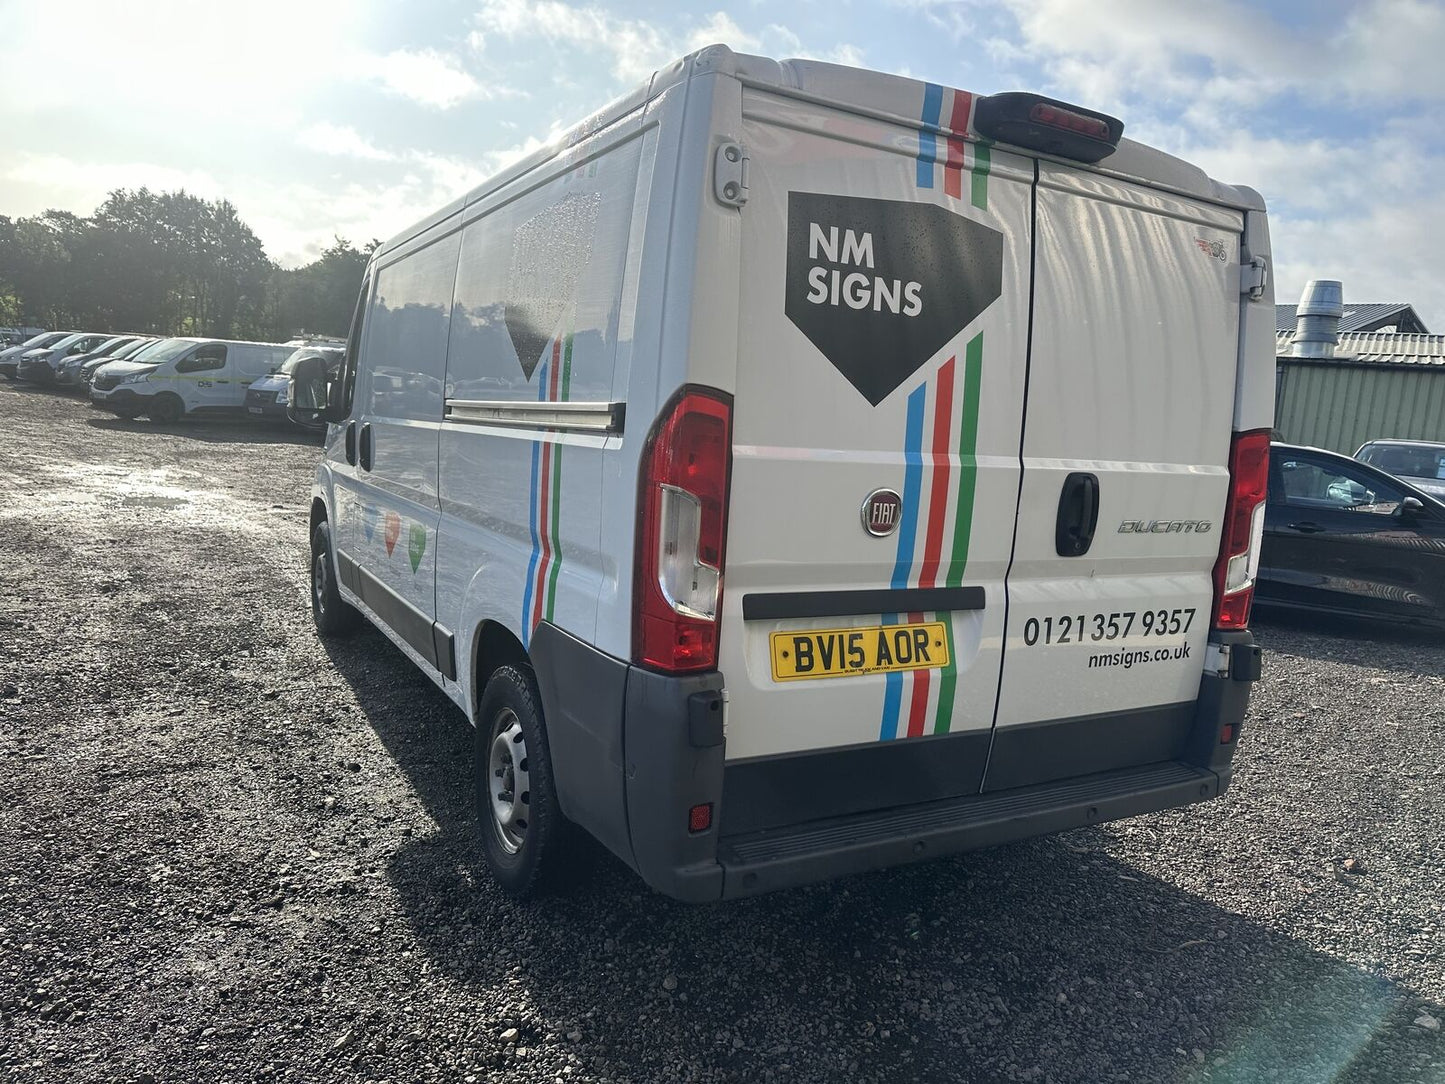 Bid on 2015 FIAT DUCATO 35 2.3 MULTIJET MWB- Buy &amp; Sell on Auction with EAMA Group